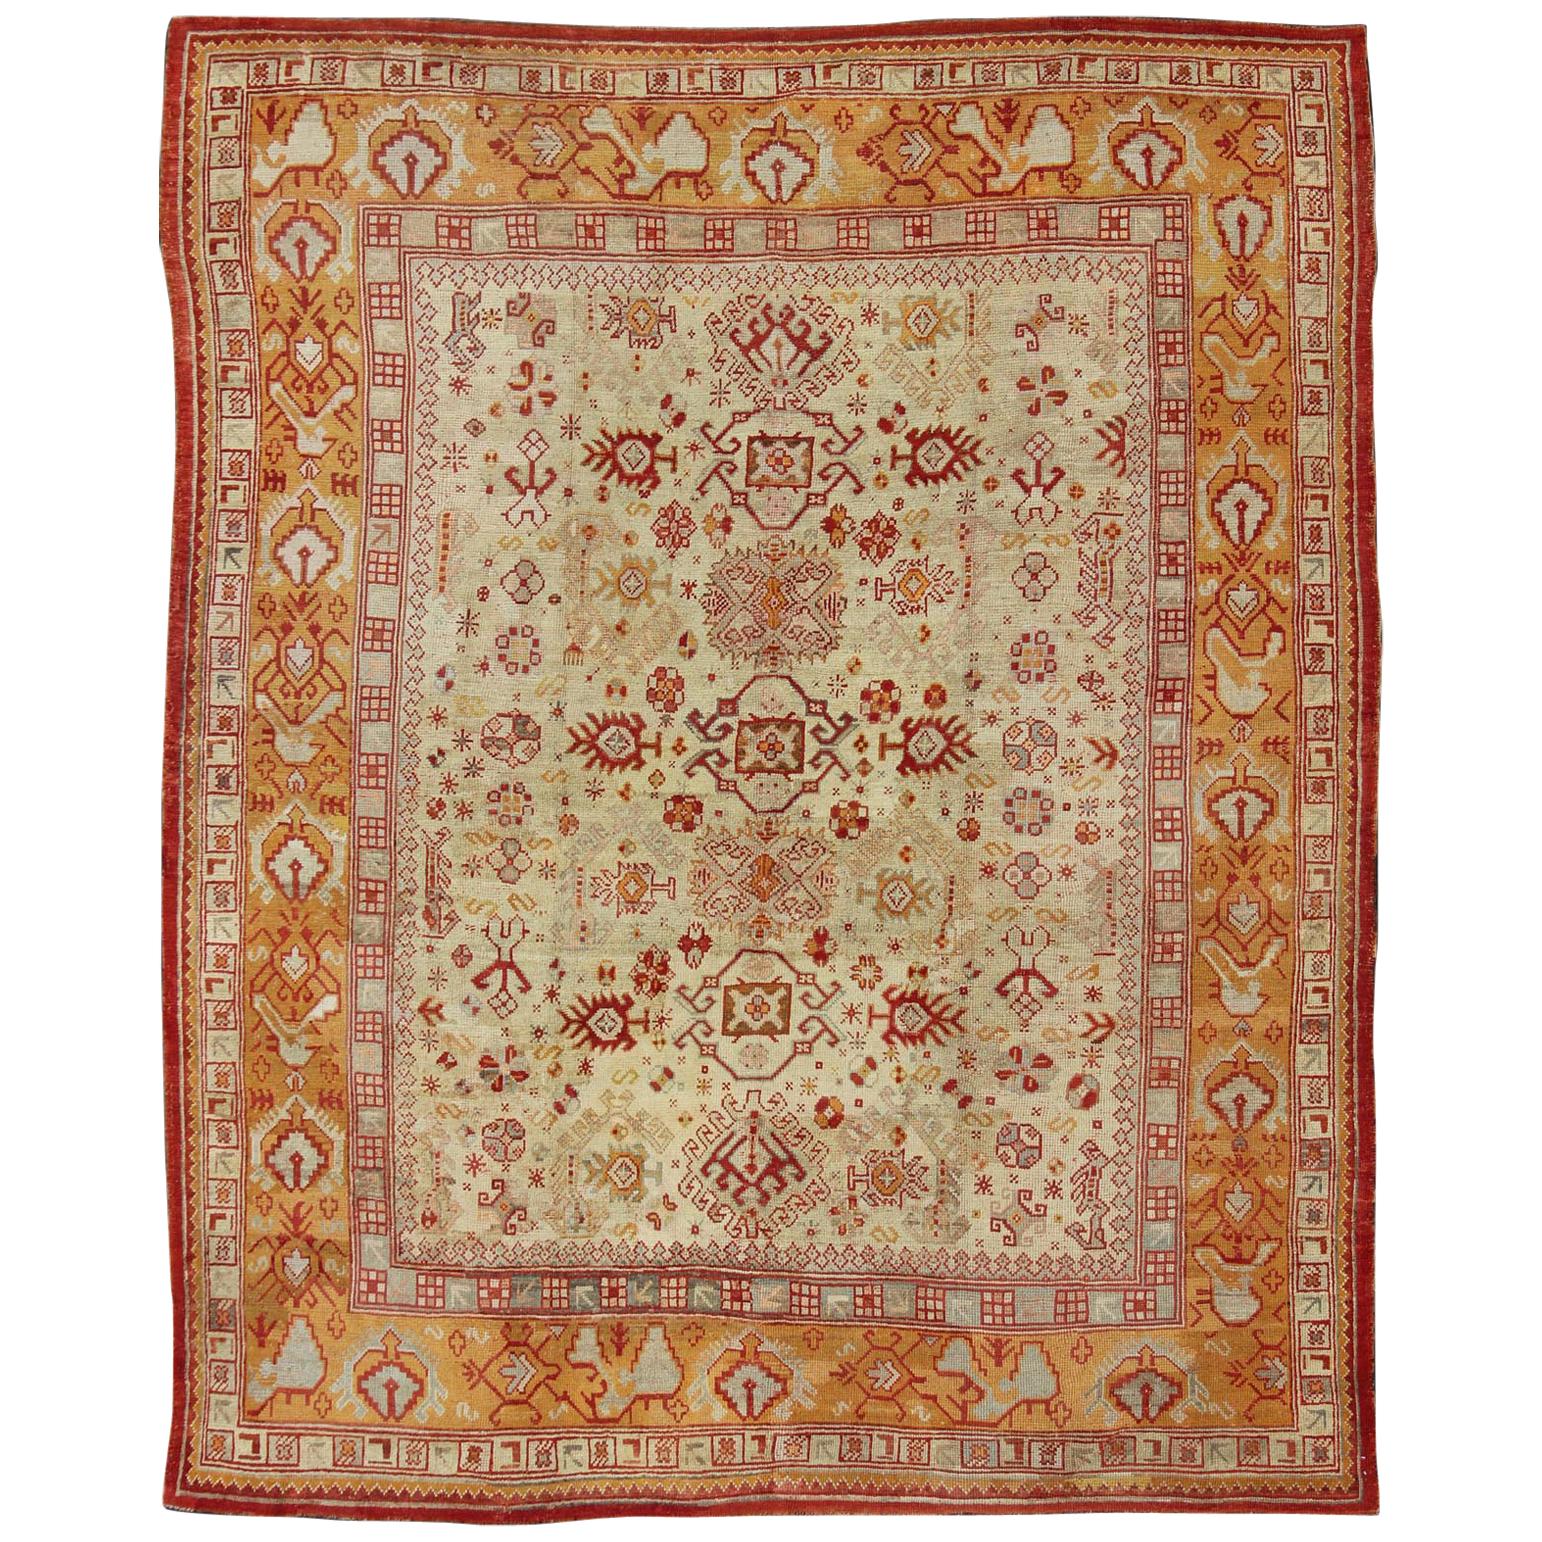 Antique Turkish Oushak Carpet With All-Over Design In Red, Taupe, and Orange